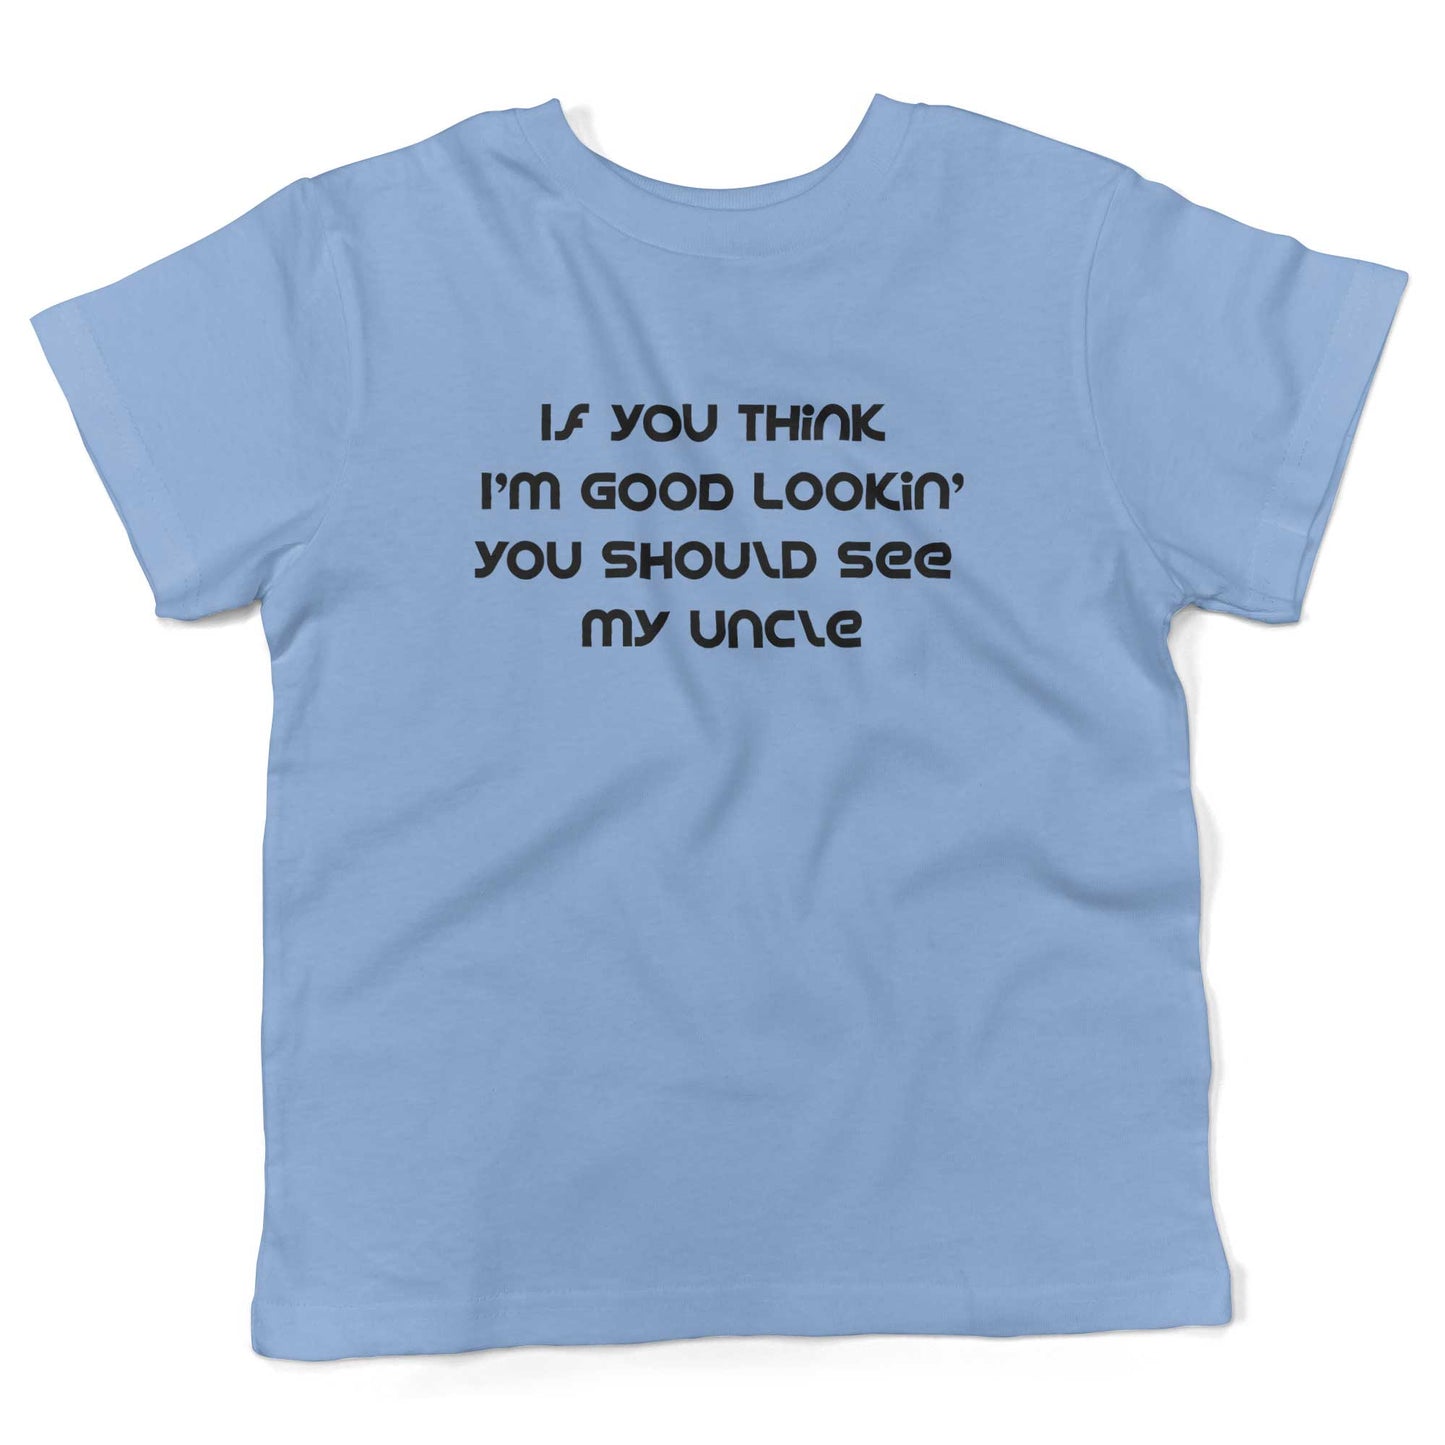 If You Think I'm Good Lookin' You Should See My Uncle Toddler Shirt-Organic Baby Blue-2T